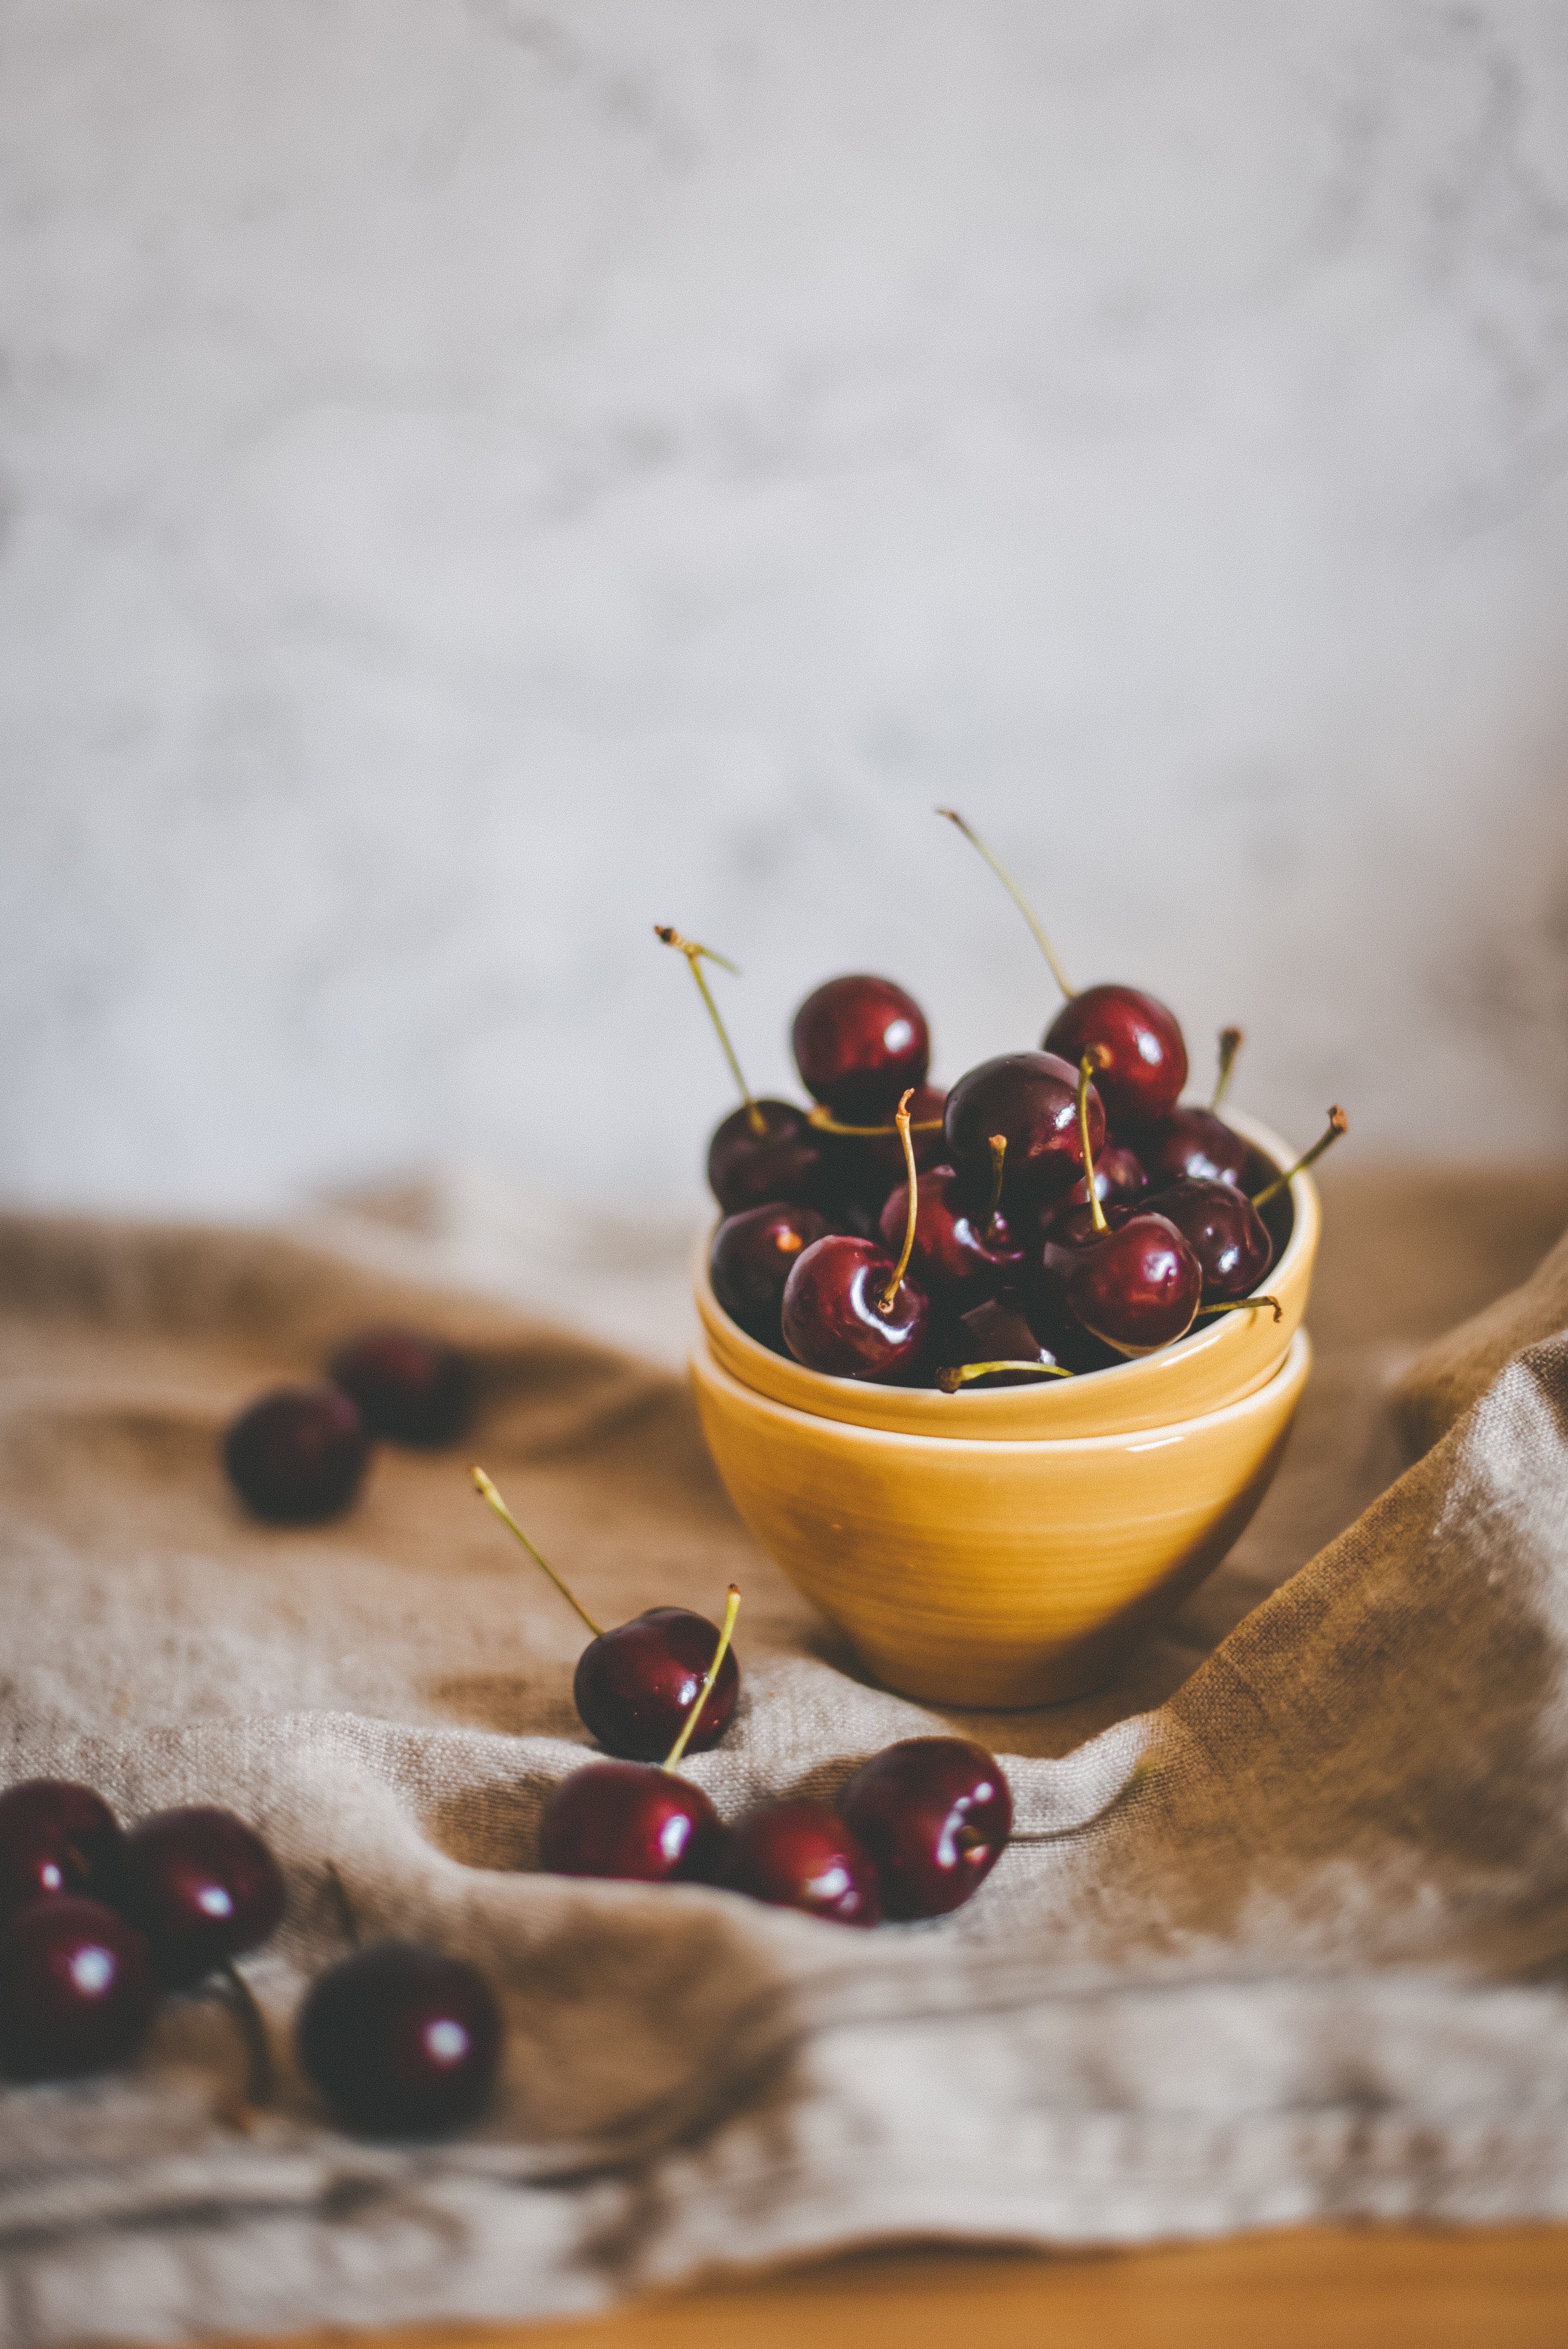 108942 download wallpaper sweet cherry, food, cherry, berry, ripe, dish screensavers and pictures for free